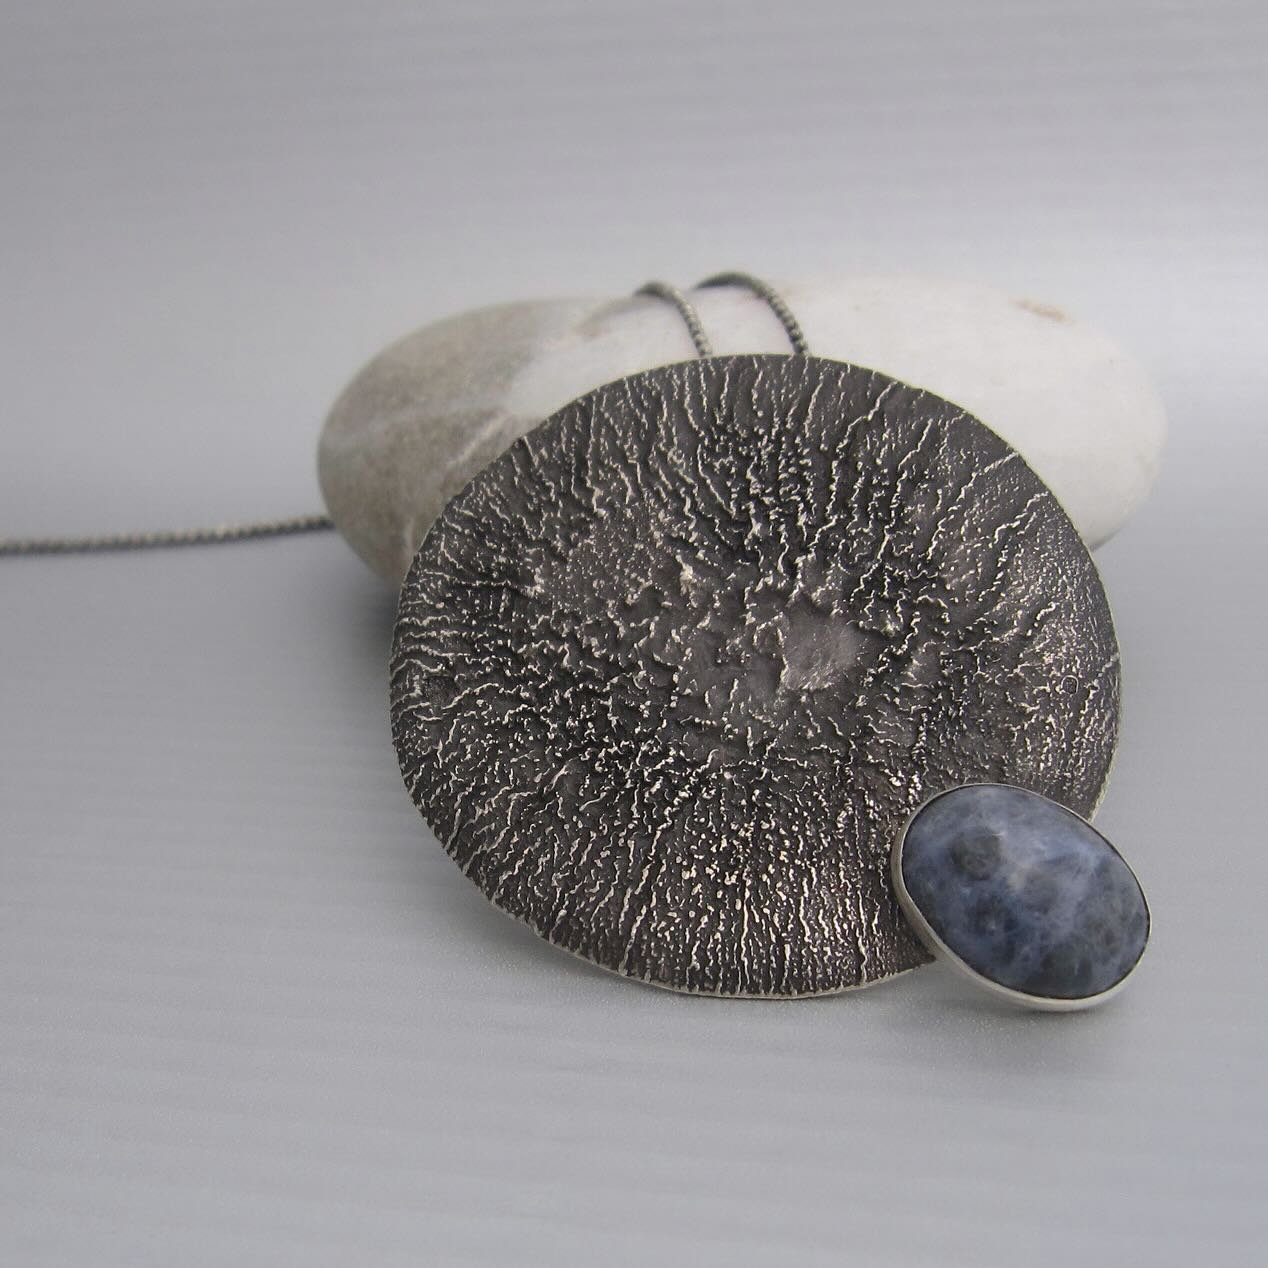 Another one of a kind piece: pianeta e sodalite necklace. Handcrafted in reclaimed sterling silver (using the technique of reticulation) and finished with a sodalite stone.

Image+design&copy;️maddalenabearzi